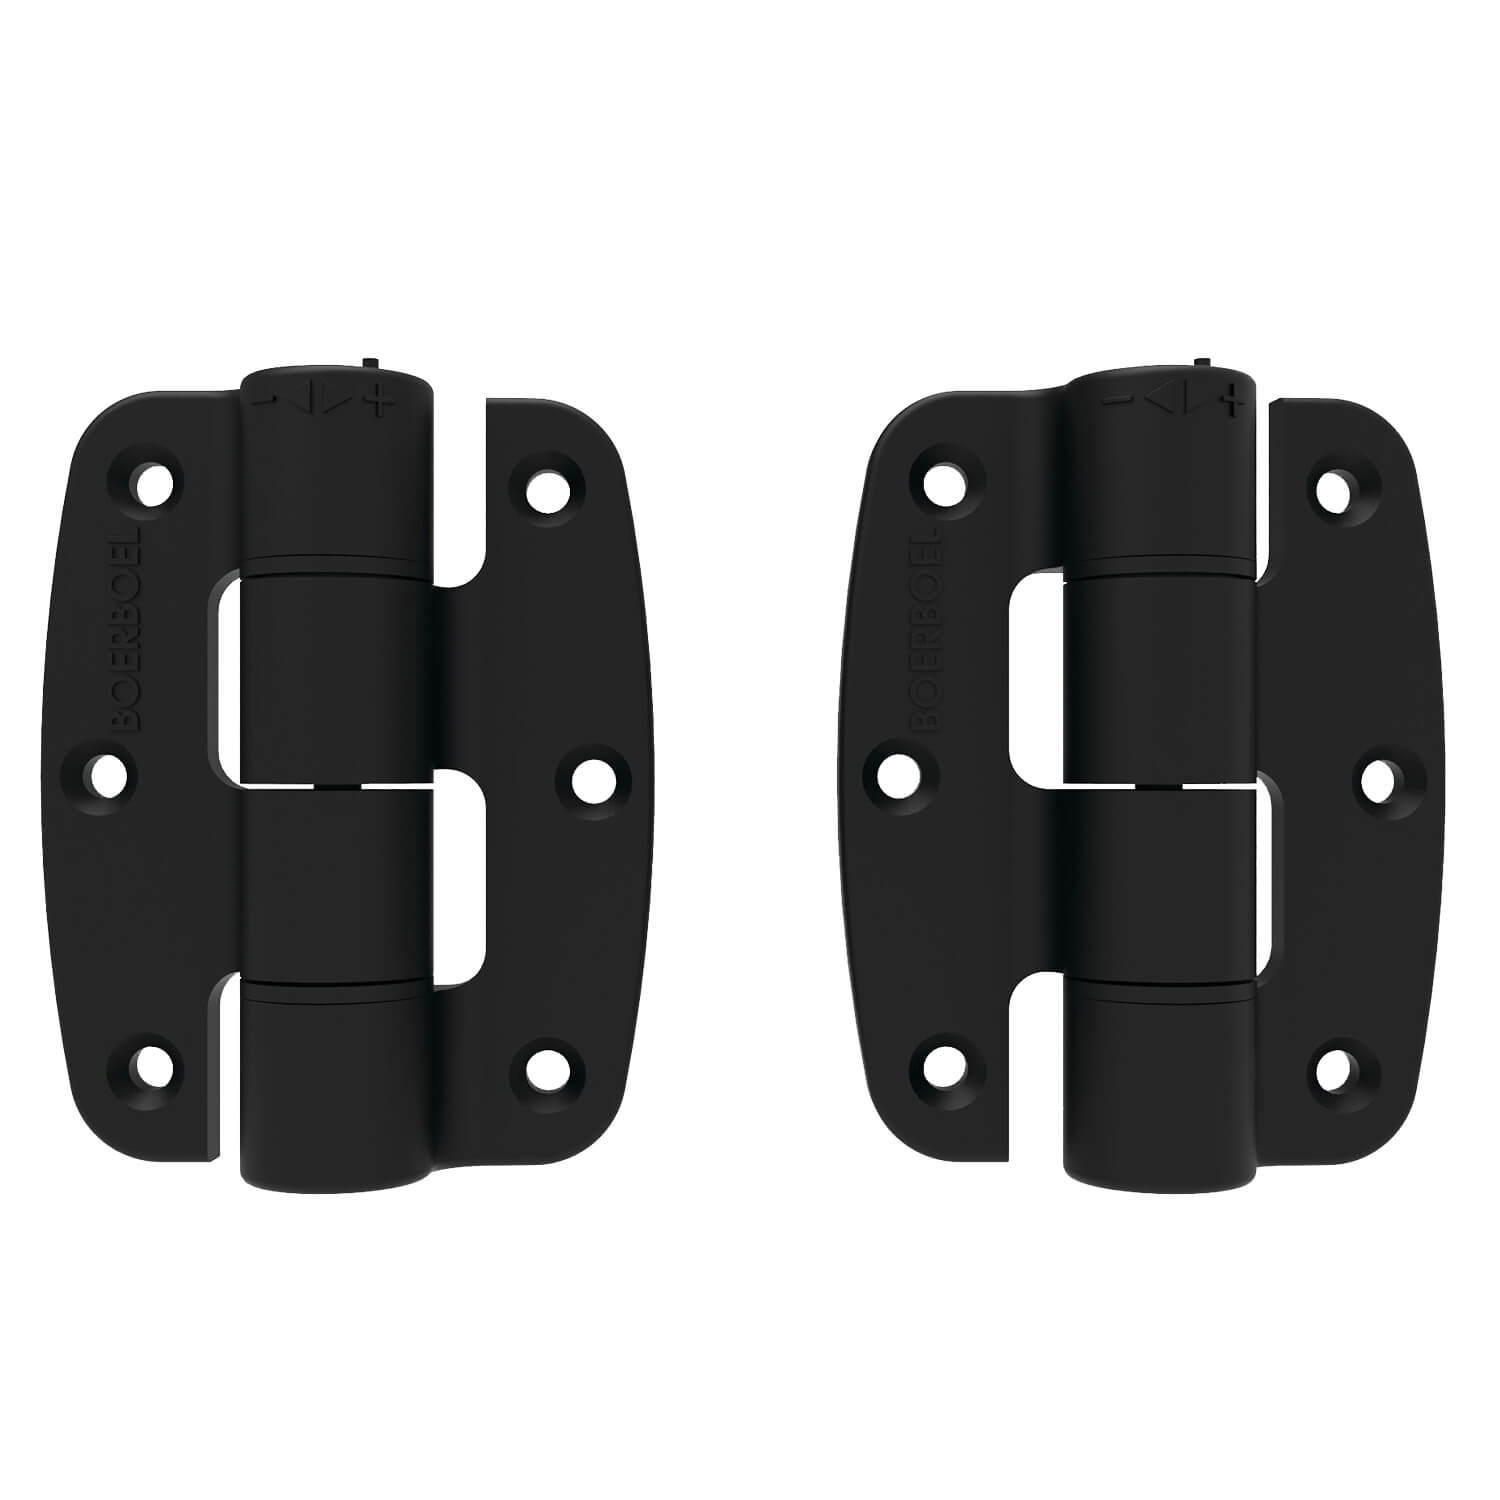 Compact Plym Butterfly Hinge - Black